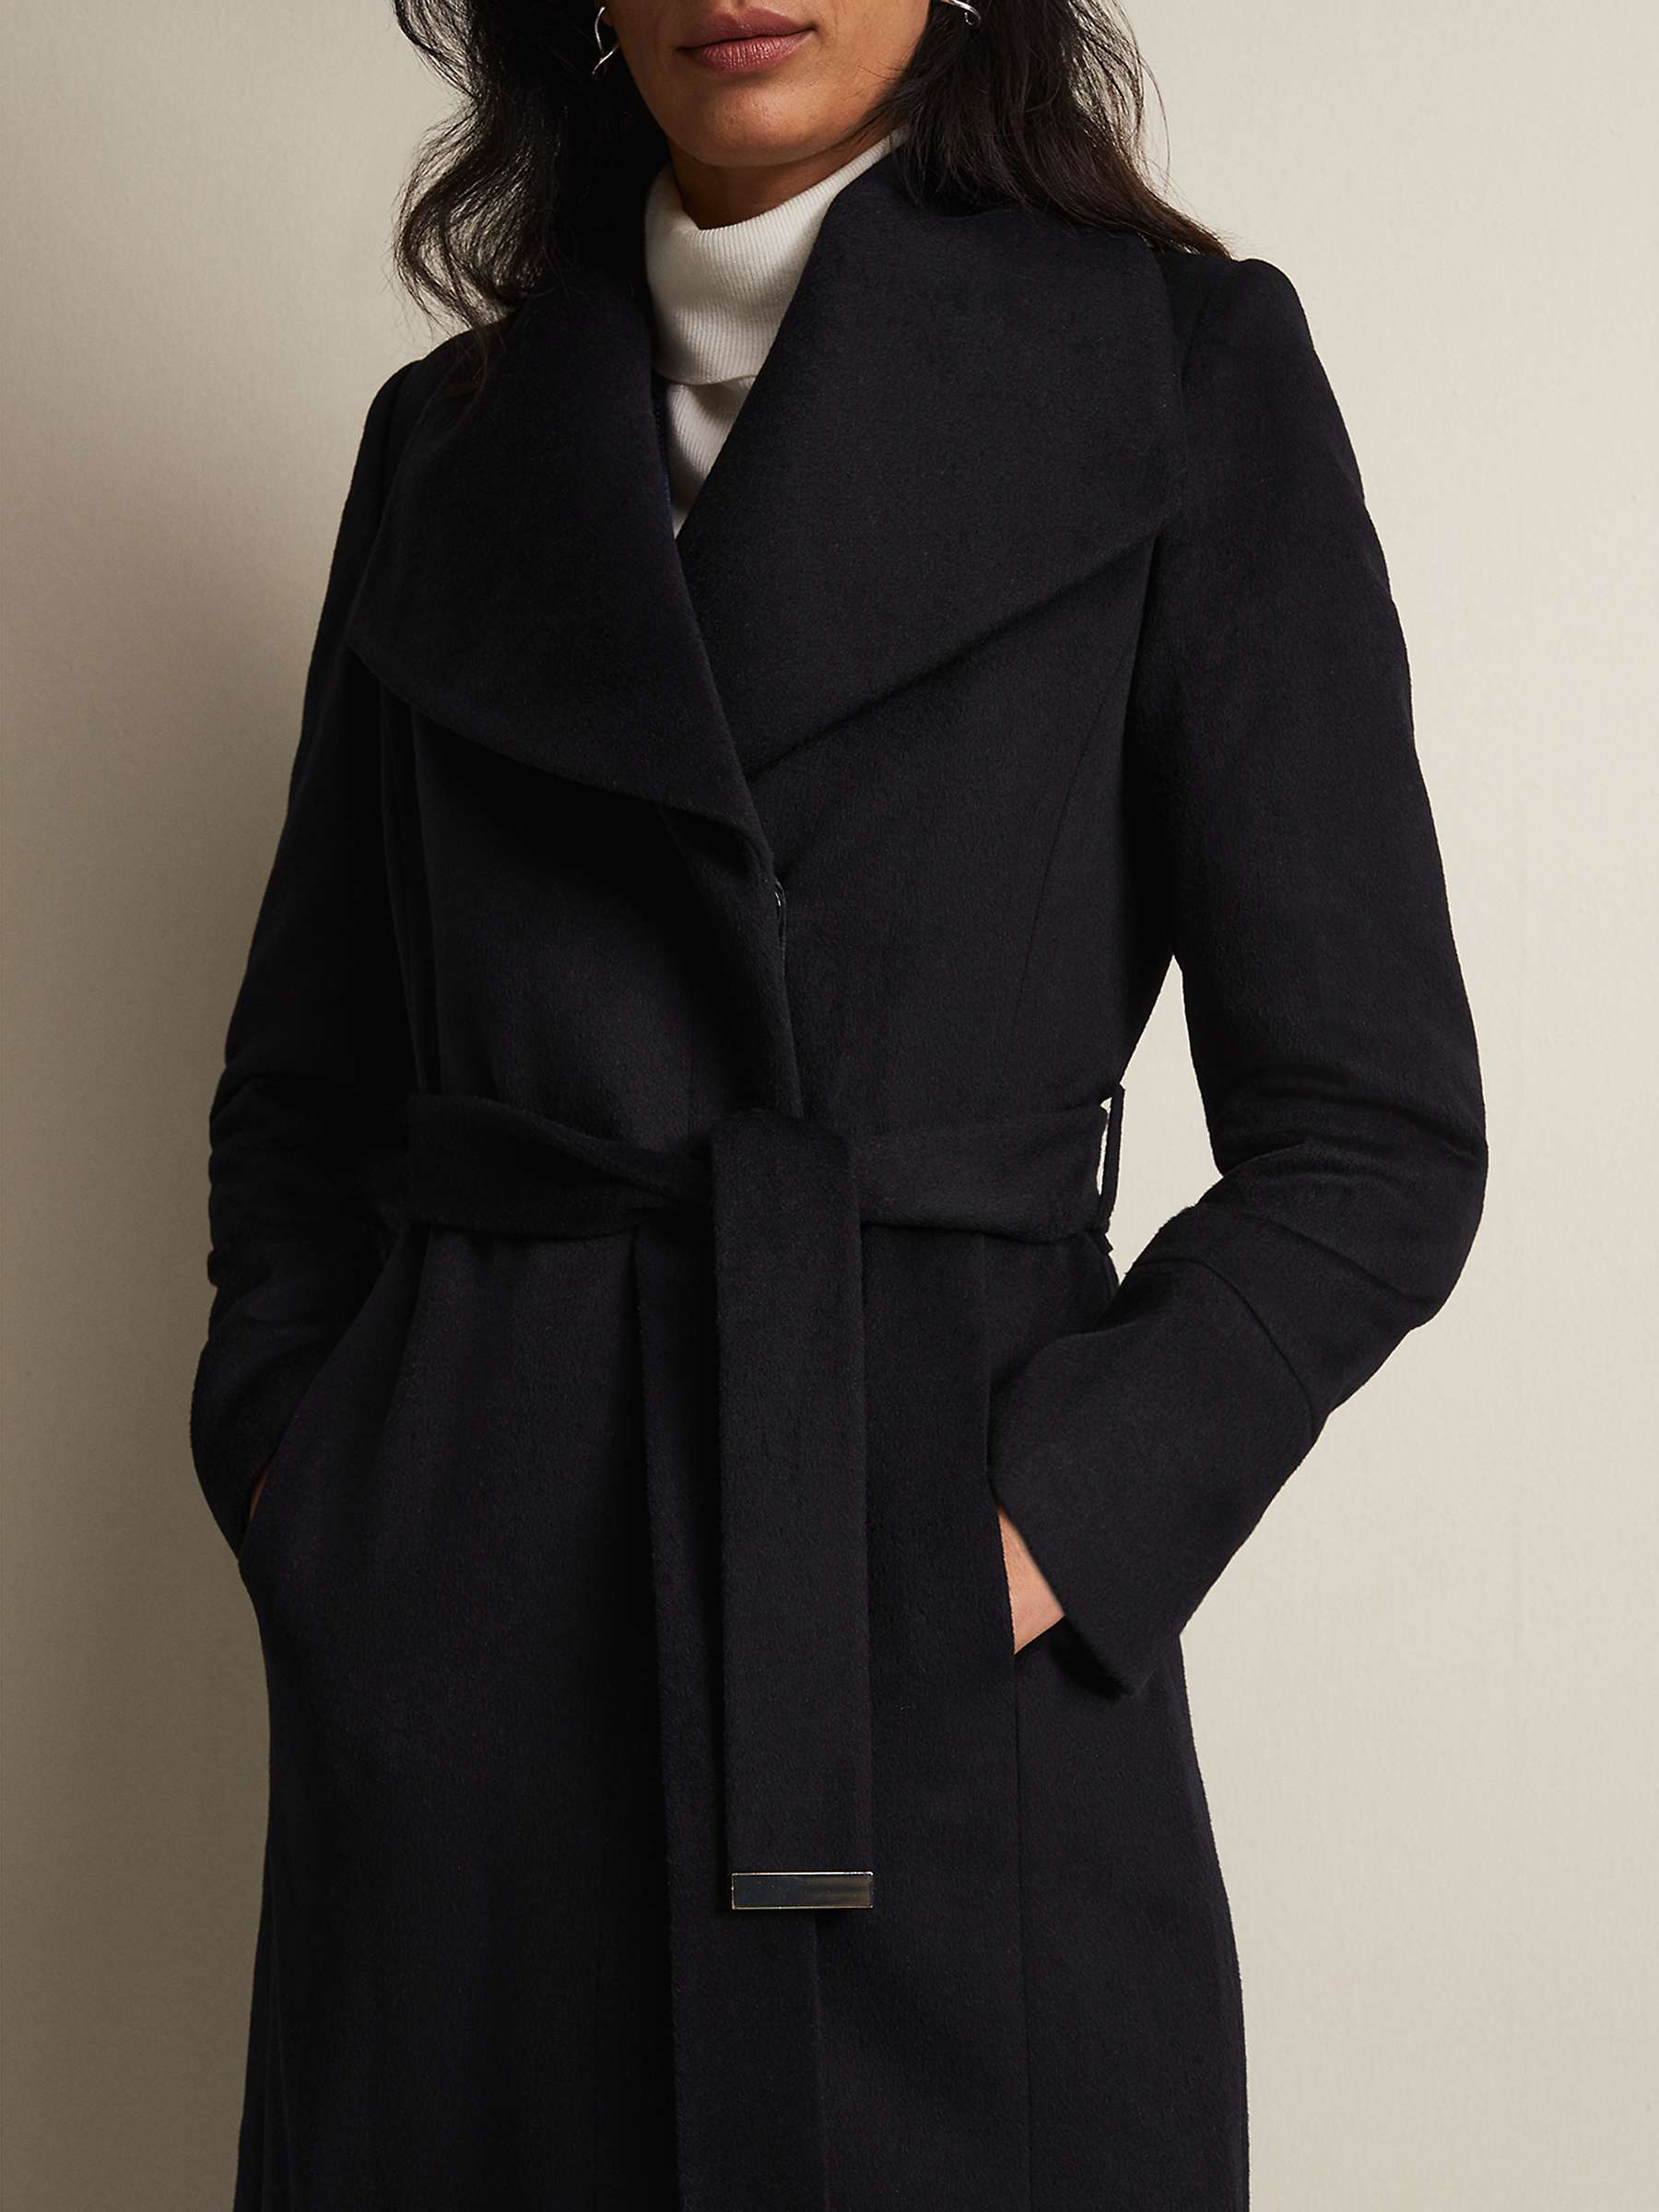 Buy Phase Eight Nicci Belted Wool Blend Coat Online at johnlewis.com